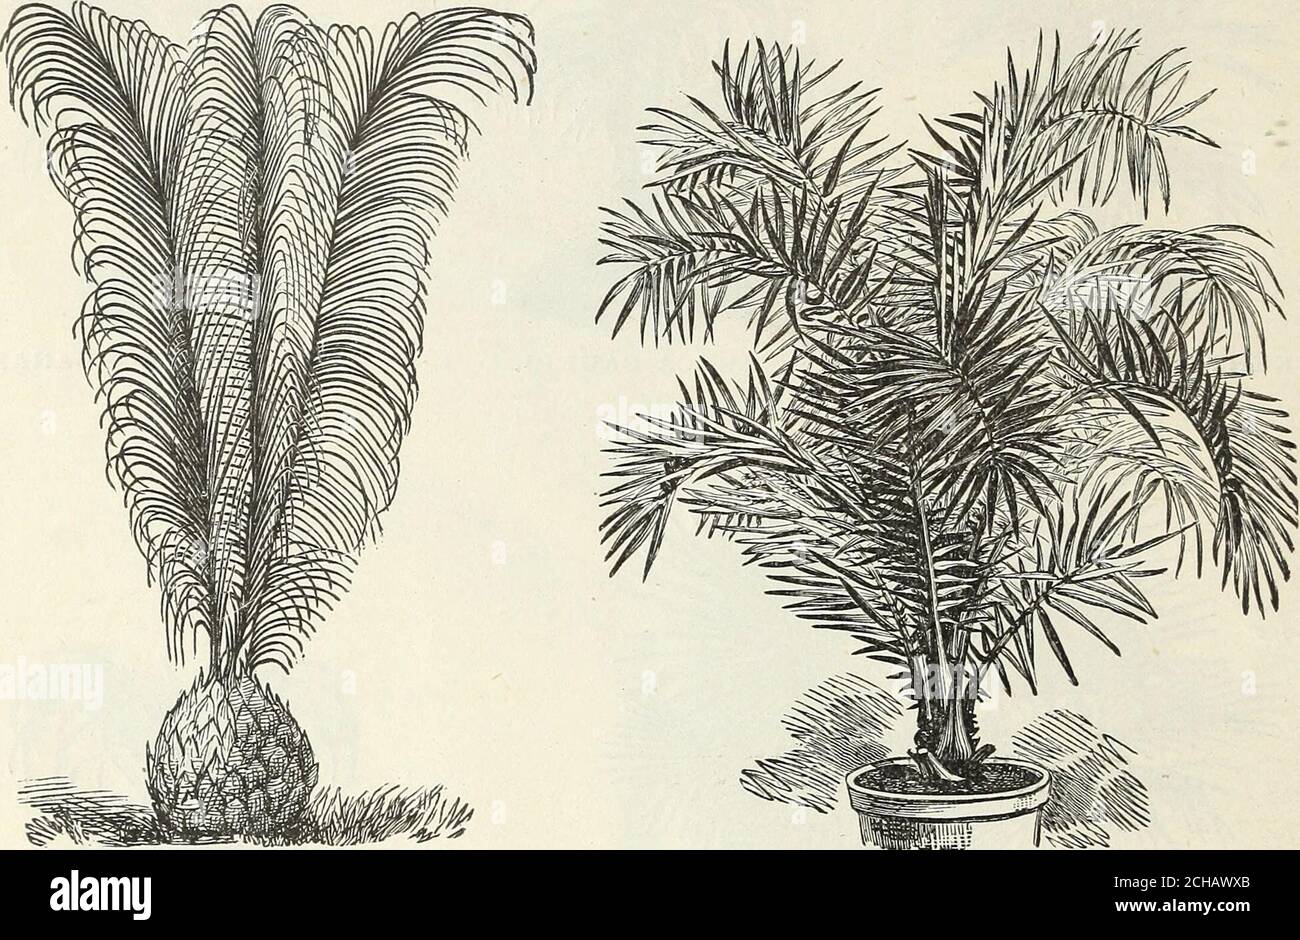 . John Saul's catalogue of plants for the spring of 1890 . WASHINGTONIA ROBUSTA. ARECA LUTESCENS. 56 JOHN SAULS DESCRIPTIVE CATALOGUE Each.*Trinax Argentea, a very beautiful dwarf Palm, leaves fan-shaped, very handsome..30 c, 50 c. to 1 00*Elegans, a dwarf Palm, leaves lan-shaped; itis an exceedingly beautiful plant...30 c, 50 c. to 1 00*Pandanus Utilis, screw Pines...25 cts.,50 cts. to 1 00*Ptychosperma Alexandrae, an extremely hand-some greenhouse Palm, destined to become Each. one of the most elegant species for cool housepurposes and the decoration of the flowergarden during the summer. Le Stock Photo